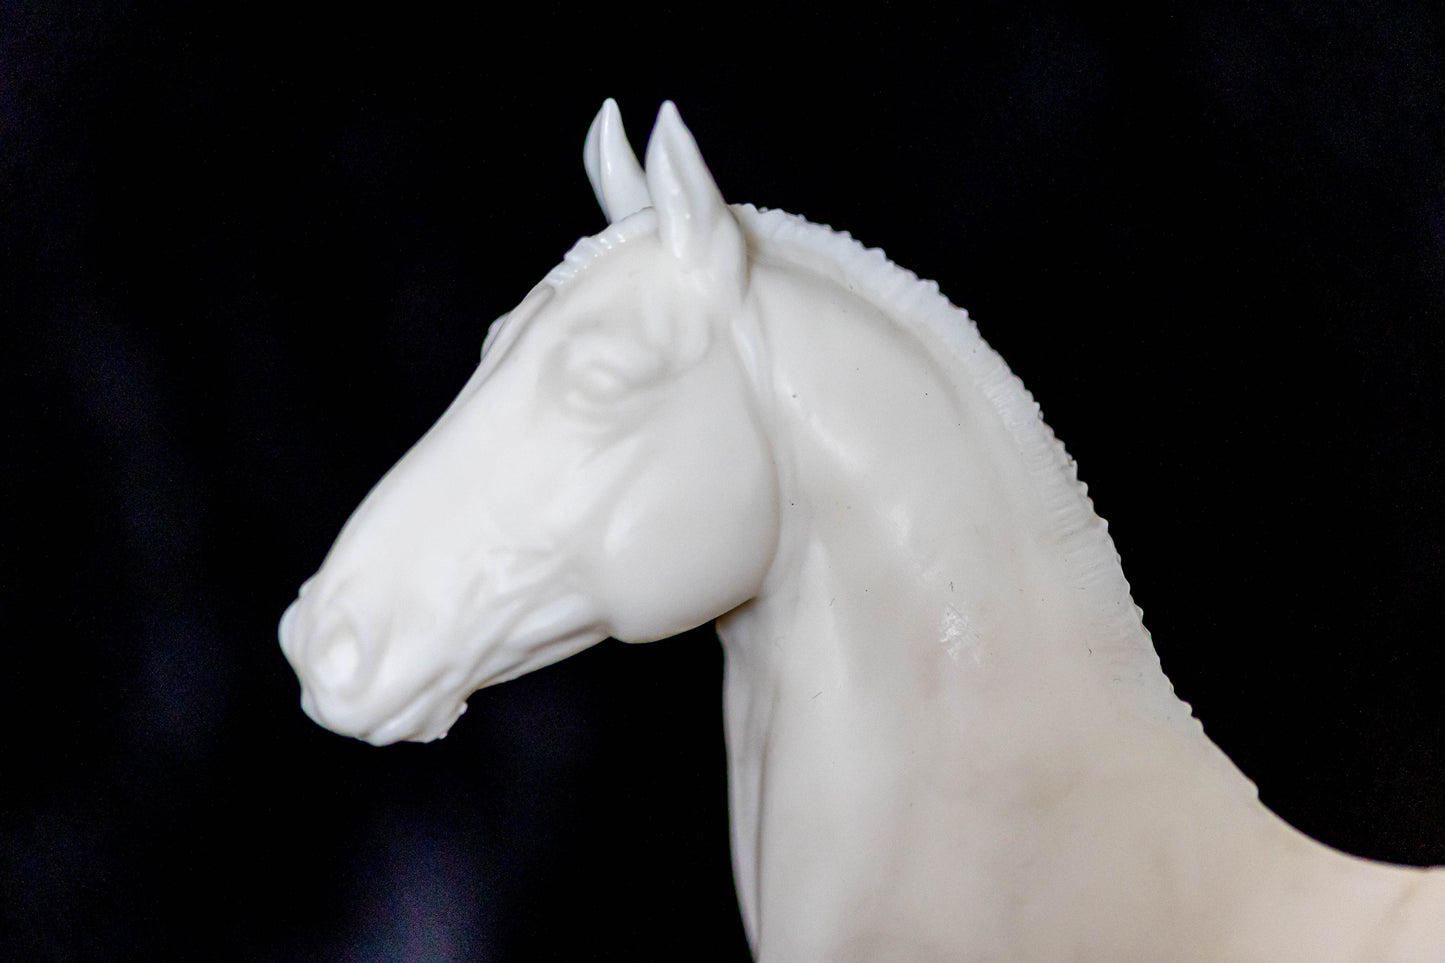 Traditional scale Grade horse / Cob - White resin ready to paint - Pre - Order - LTD TO 10 COPIES